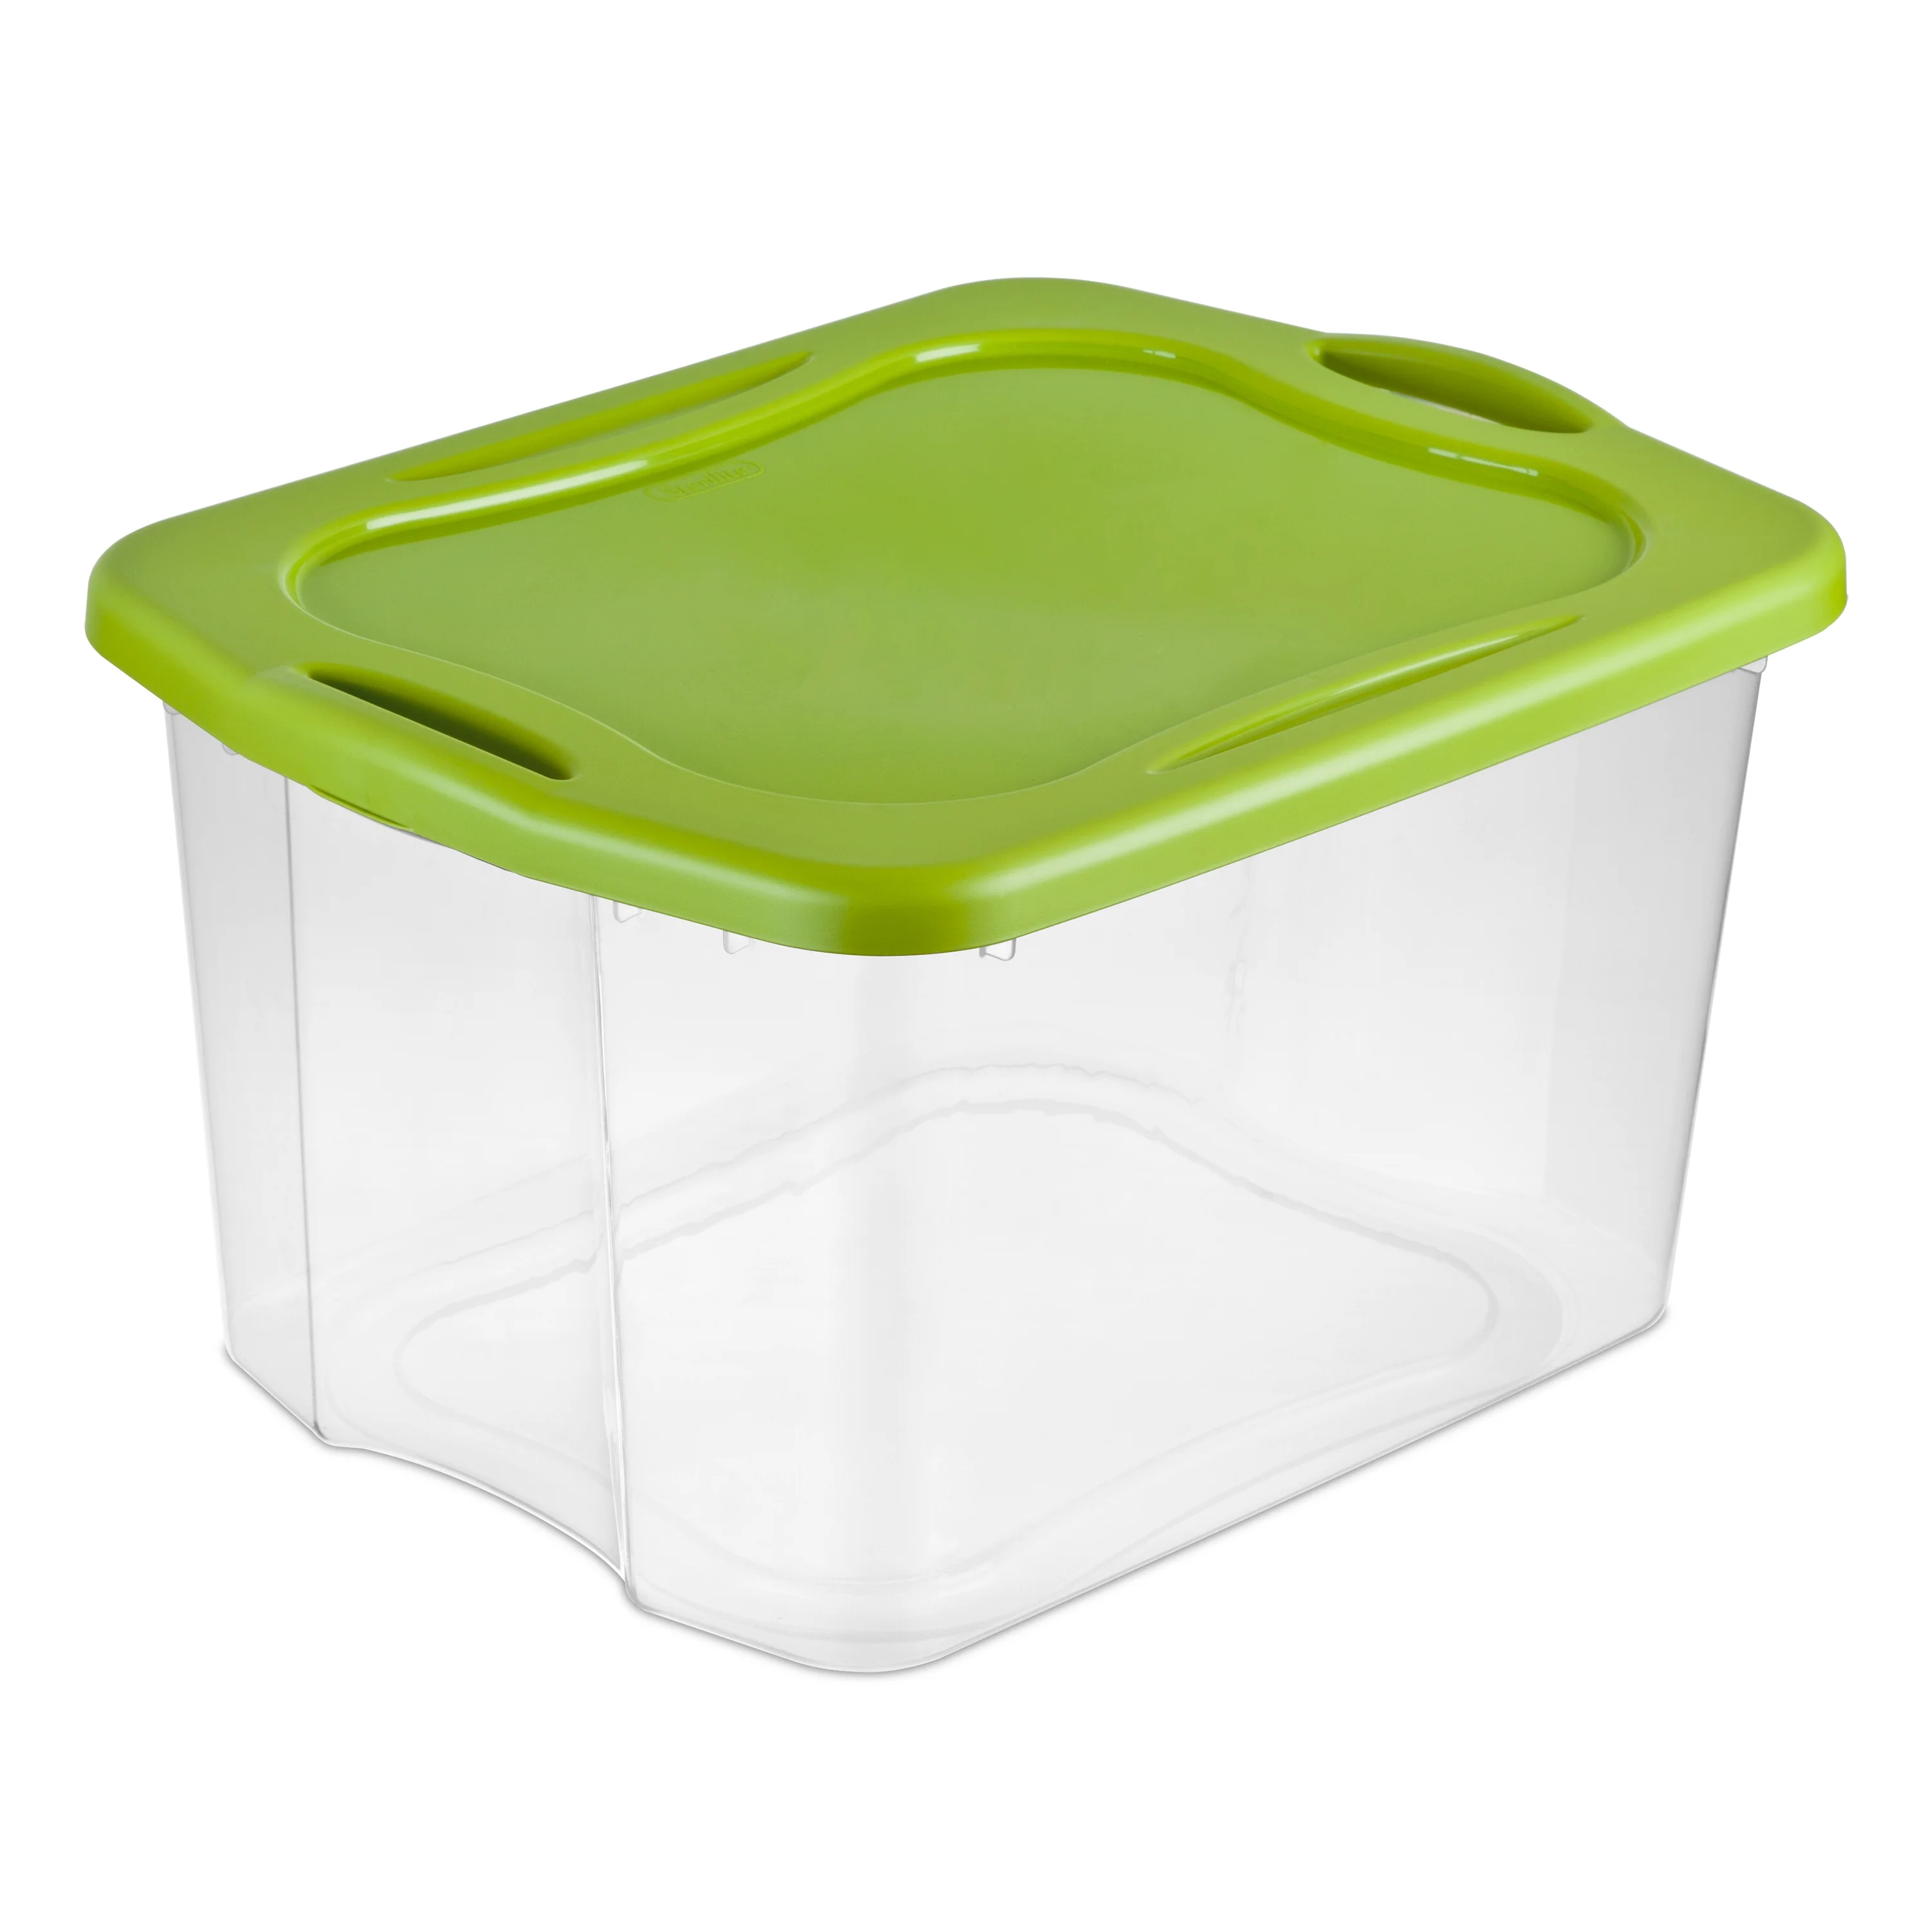 Modular Latch Box 51 Qt Plastic Storage Containers Case Of 6 Teal Sachet 